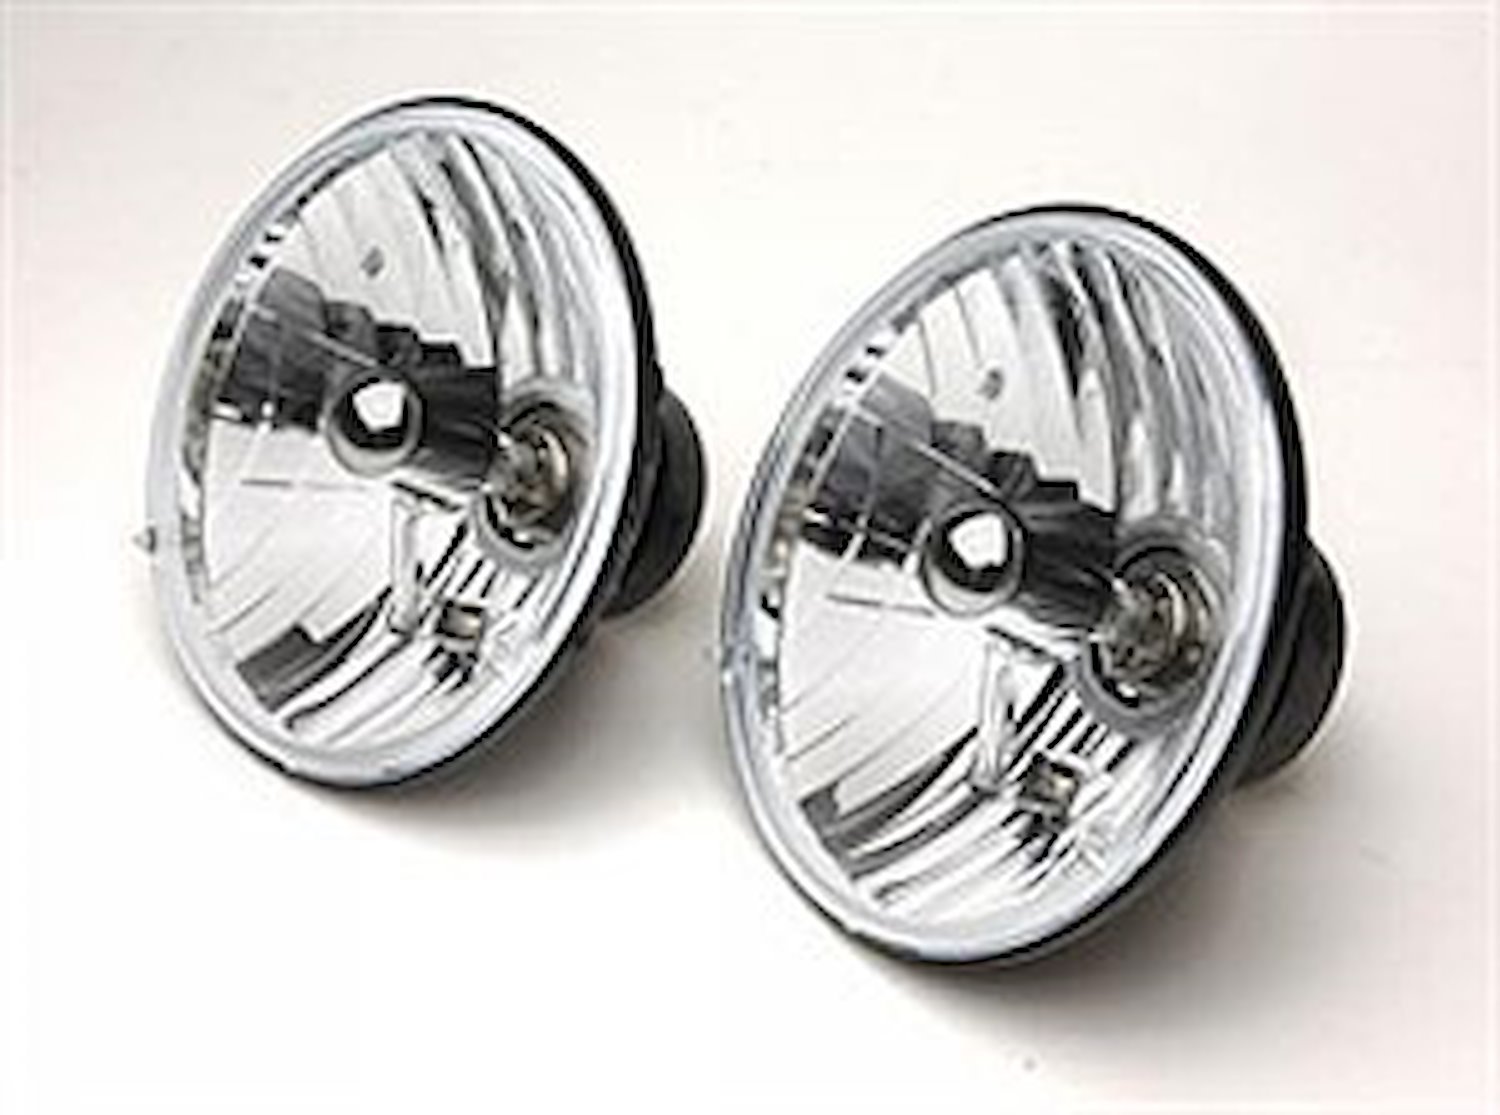 H4 MSR Headlight Conversion Kit Direct Replacement for 1958-1986 CJ